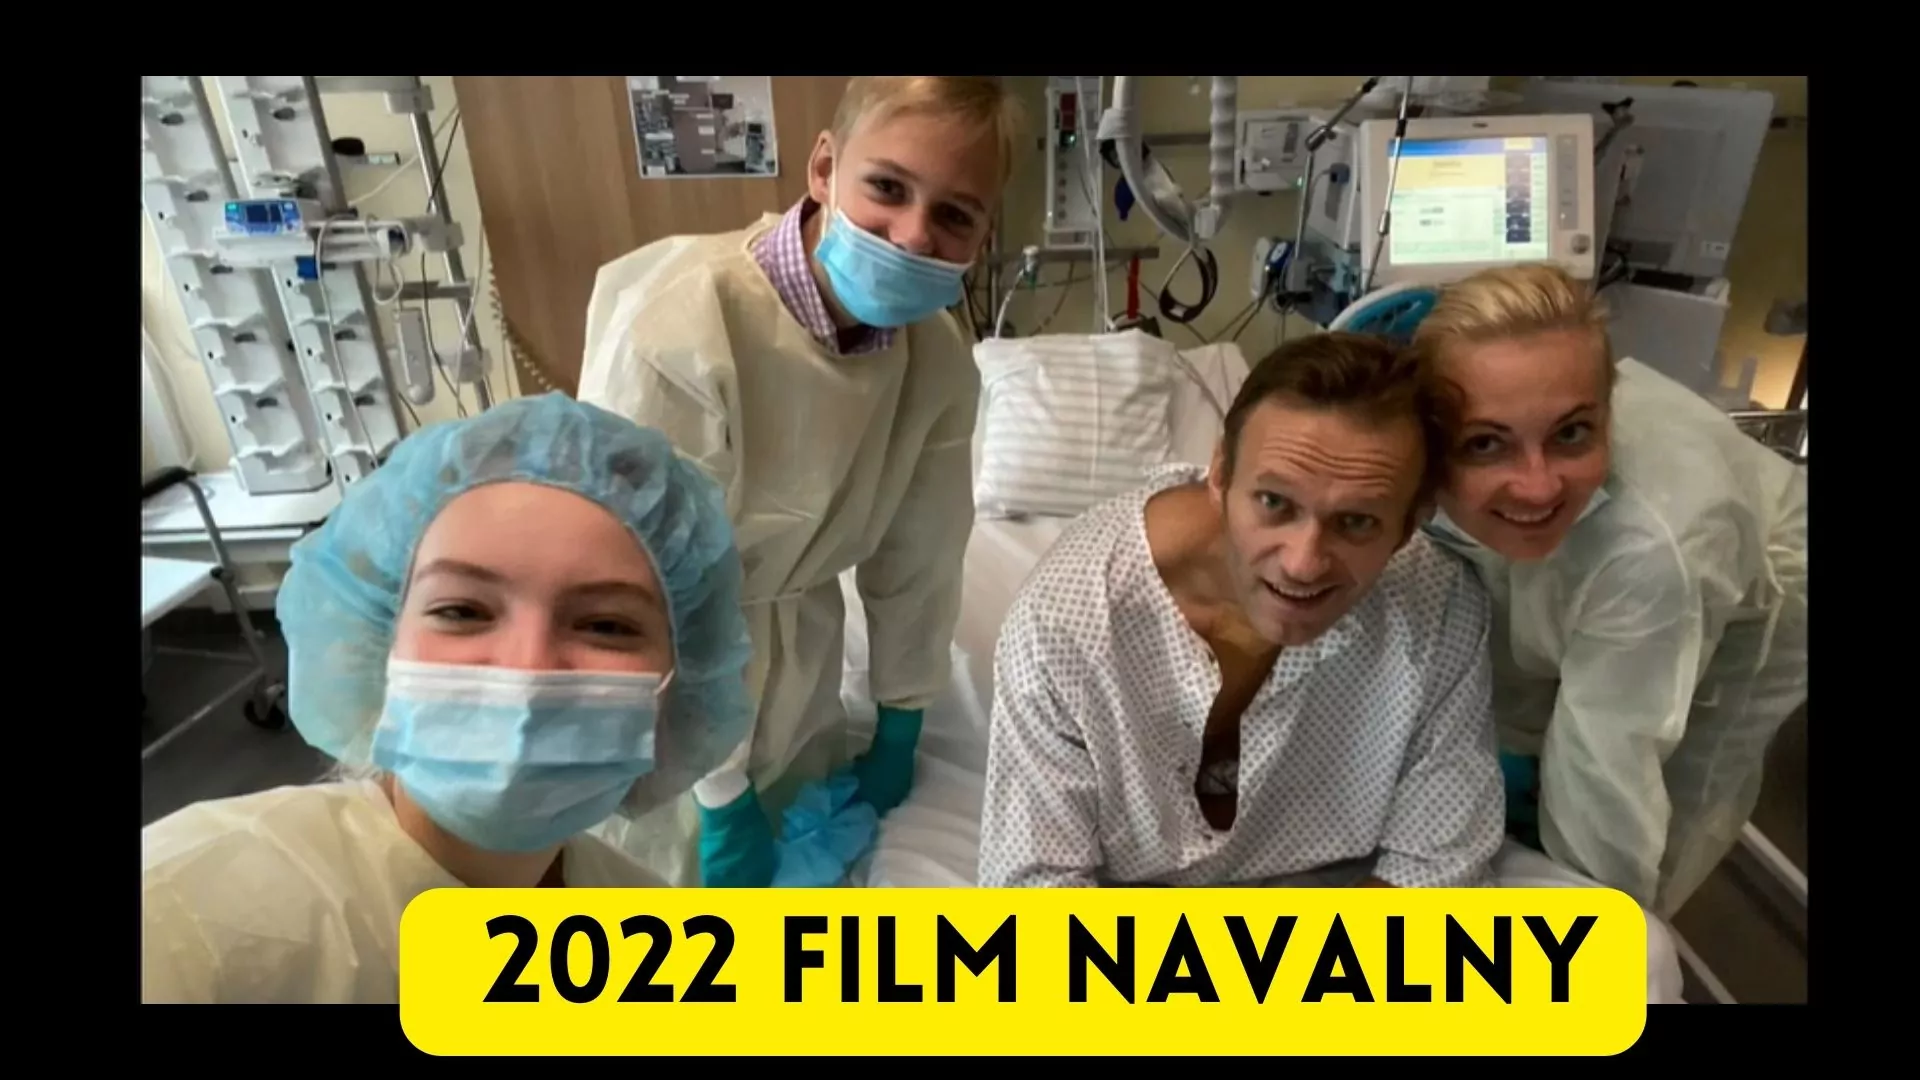 Navalny Age Rating. Navalny Parents Guide. 2022 Film Navalny release date. What 2022 Film Navalny is about? Who is in the cast of Navalny?